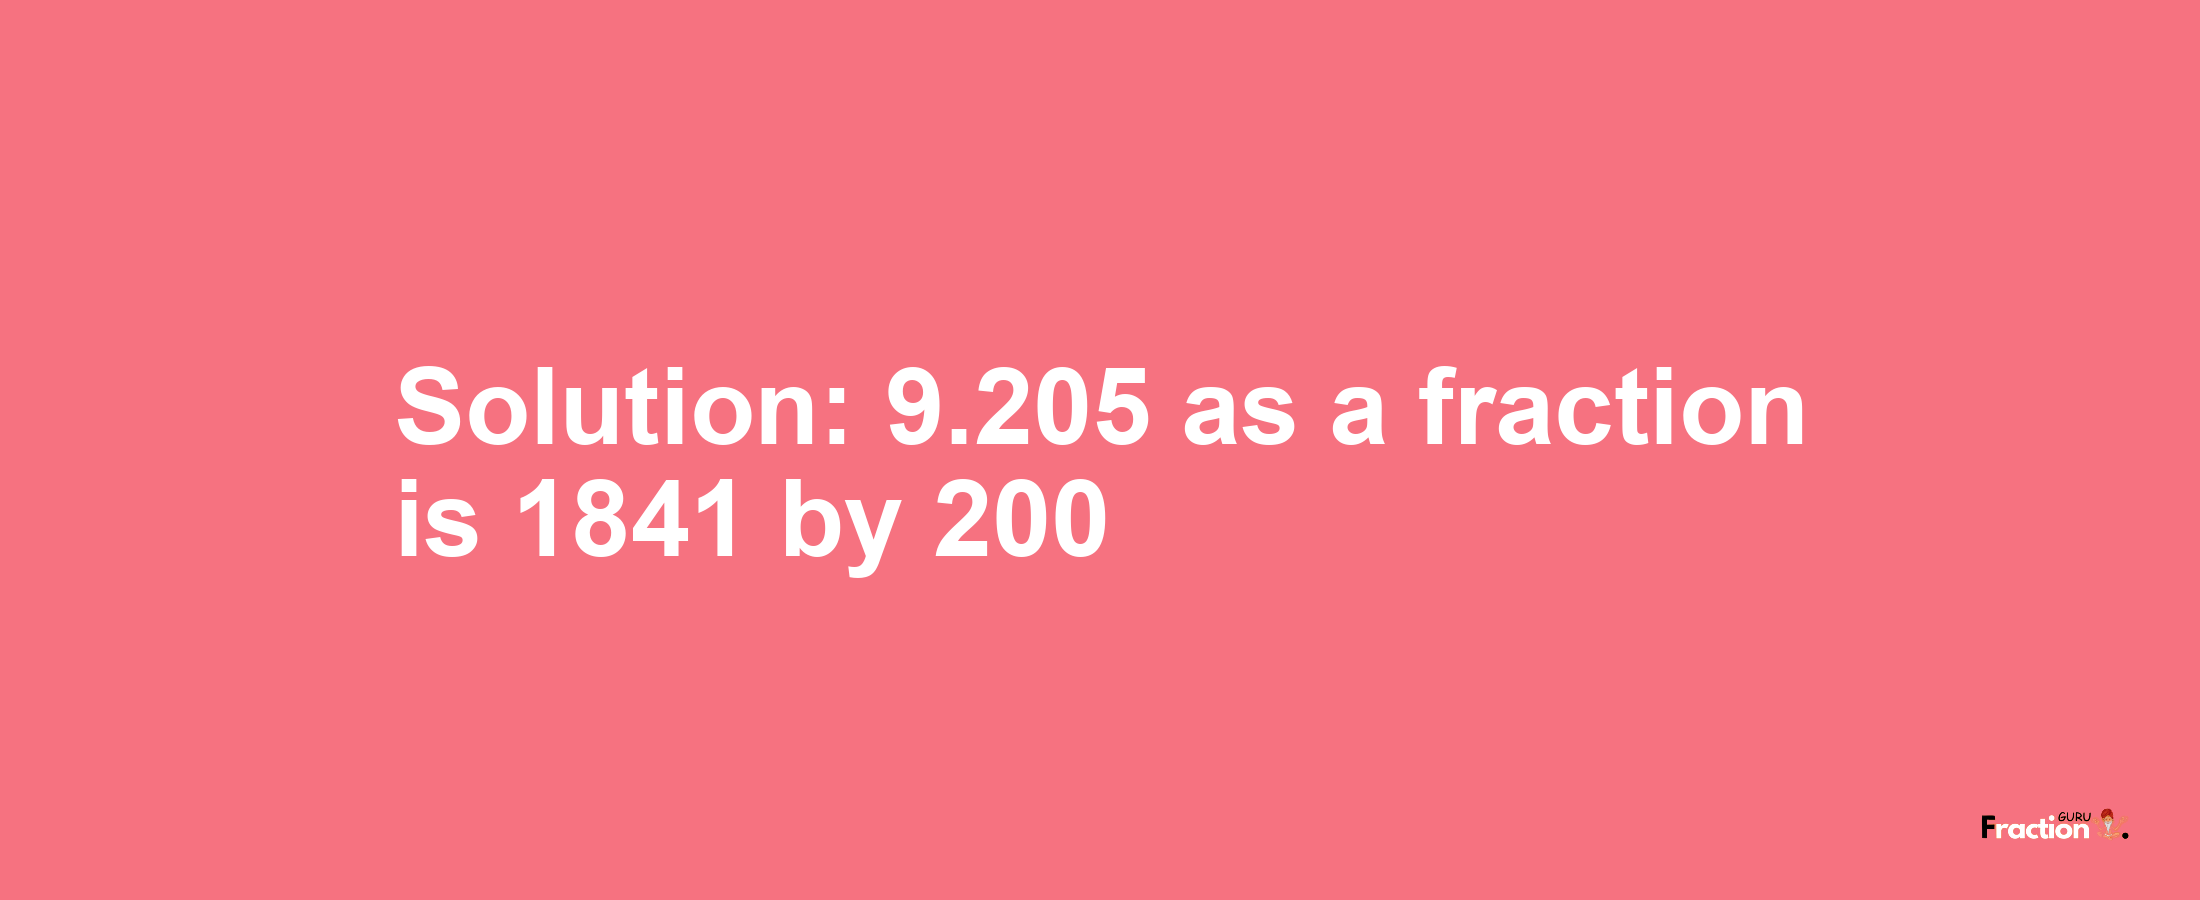 Solution:9.205 as a fraction is 1841/200